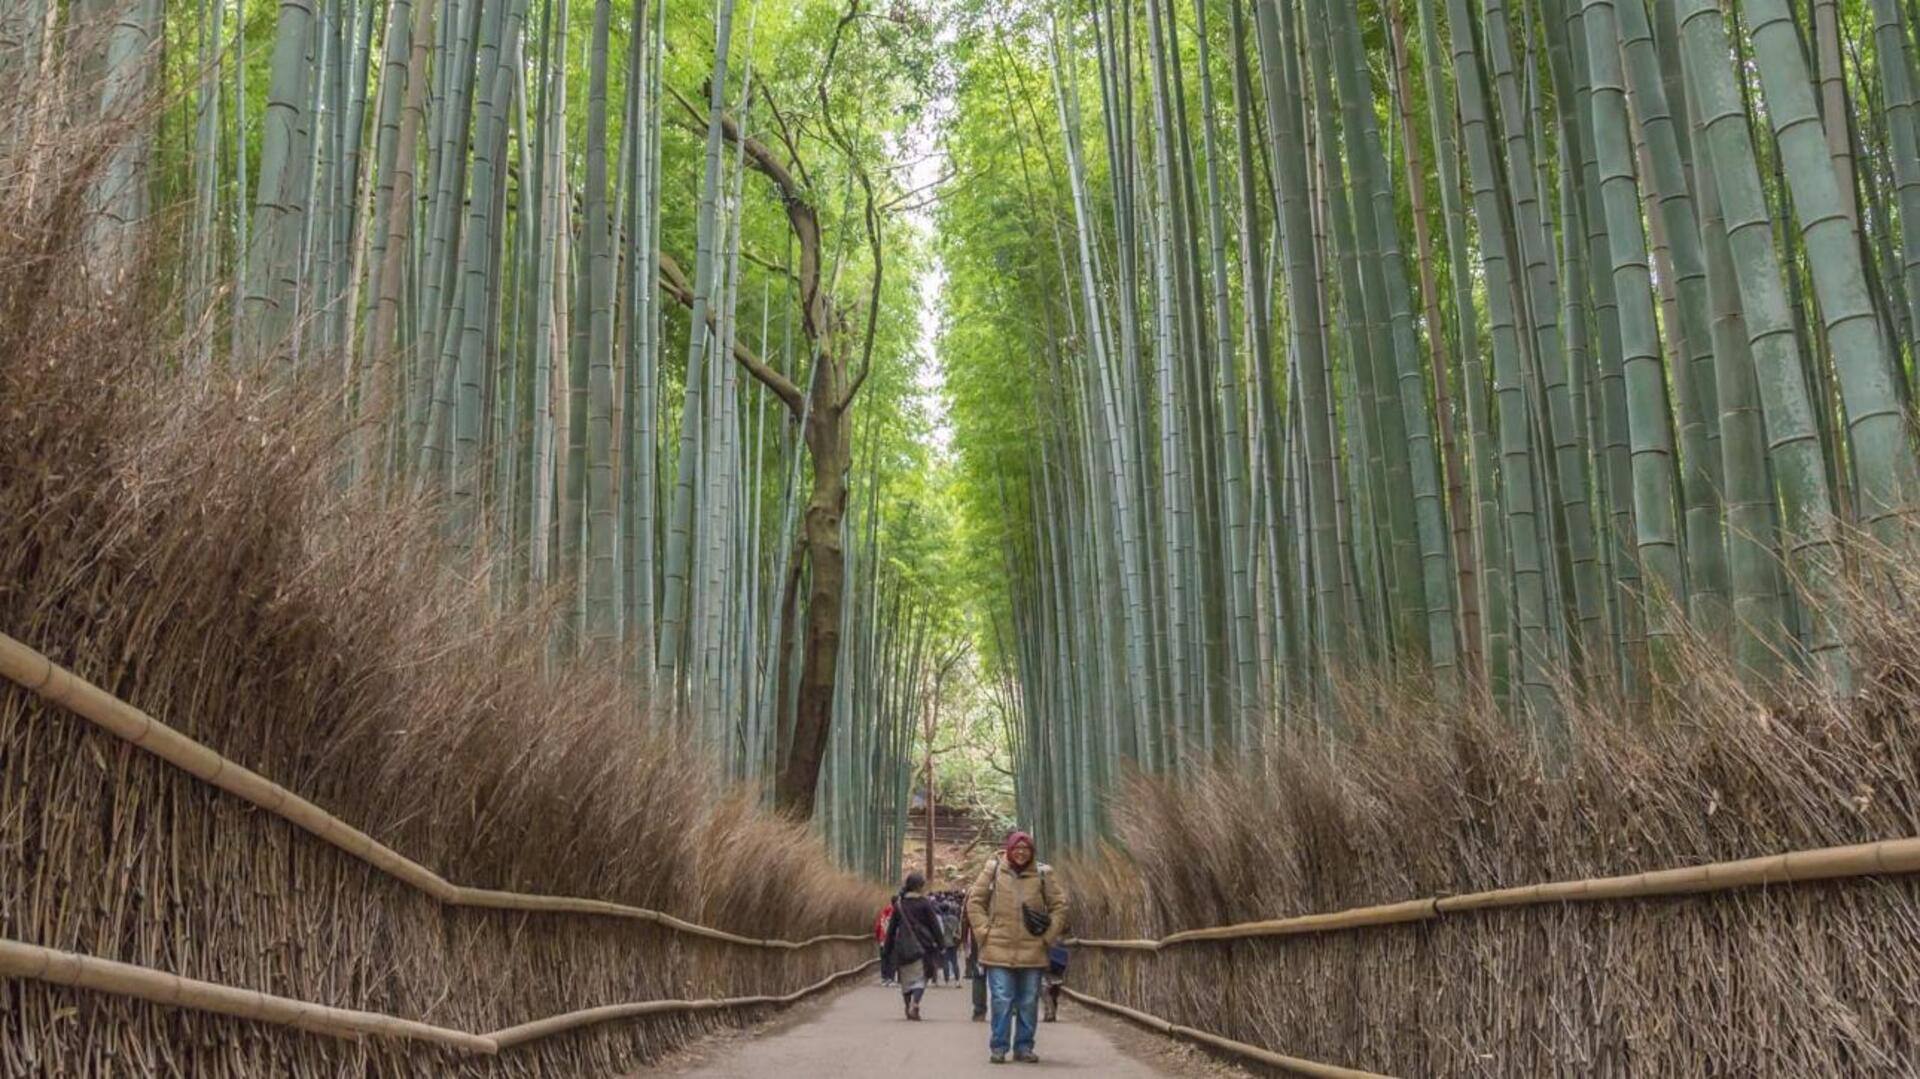 Experience serenity in Kyoto's Arashiyama, Japan with this travel guide